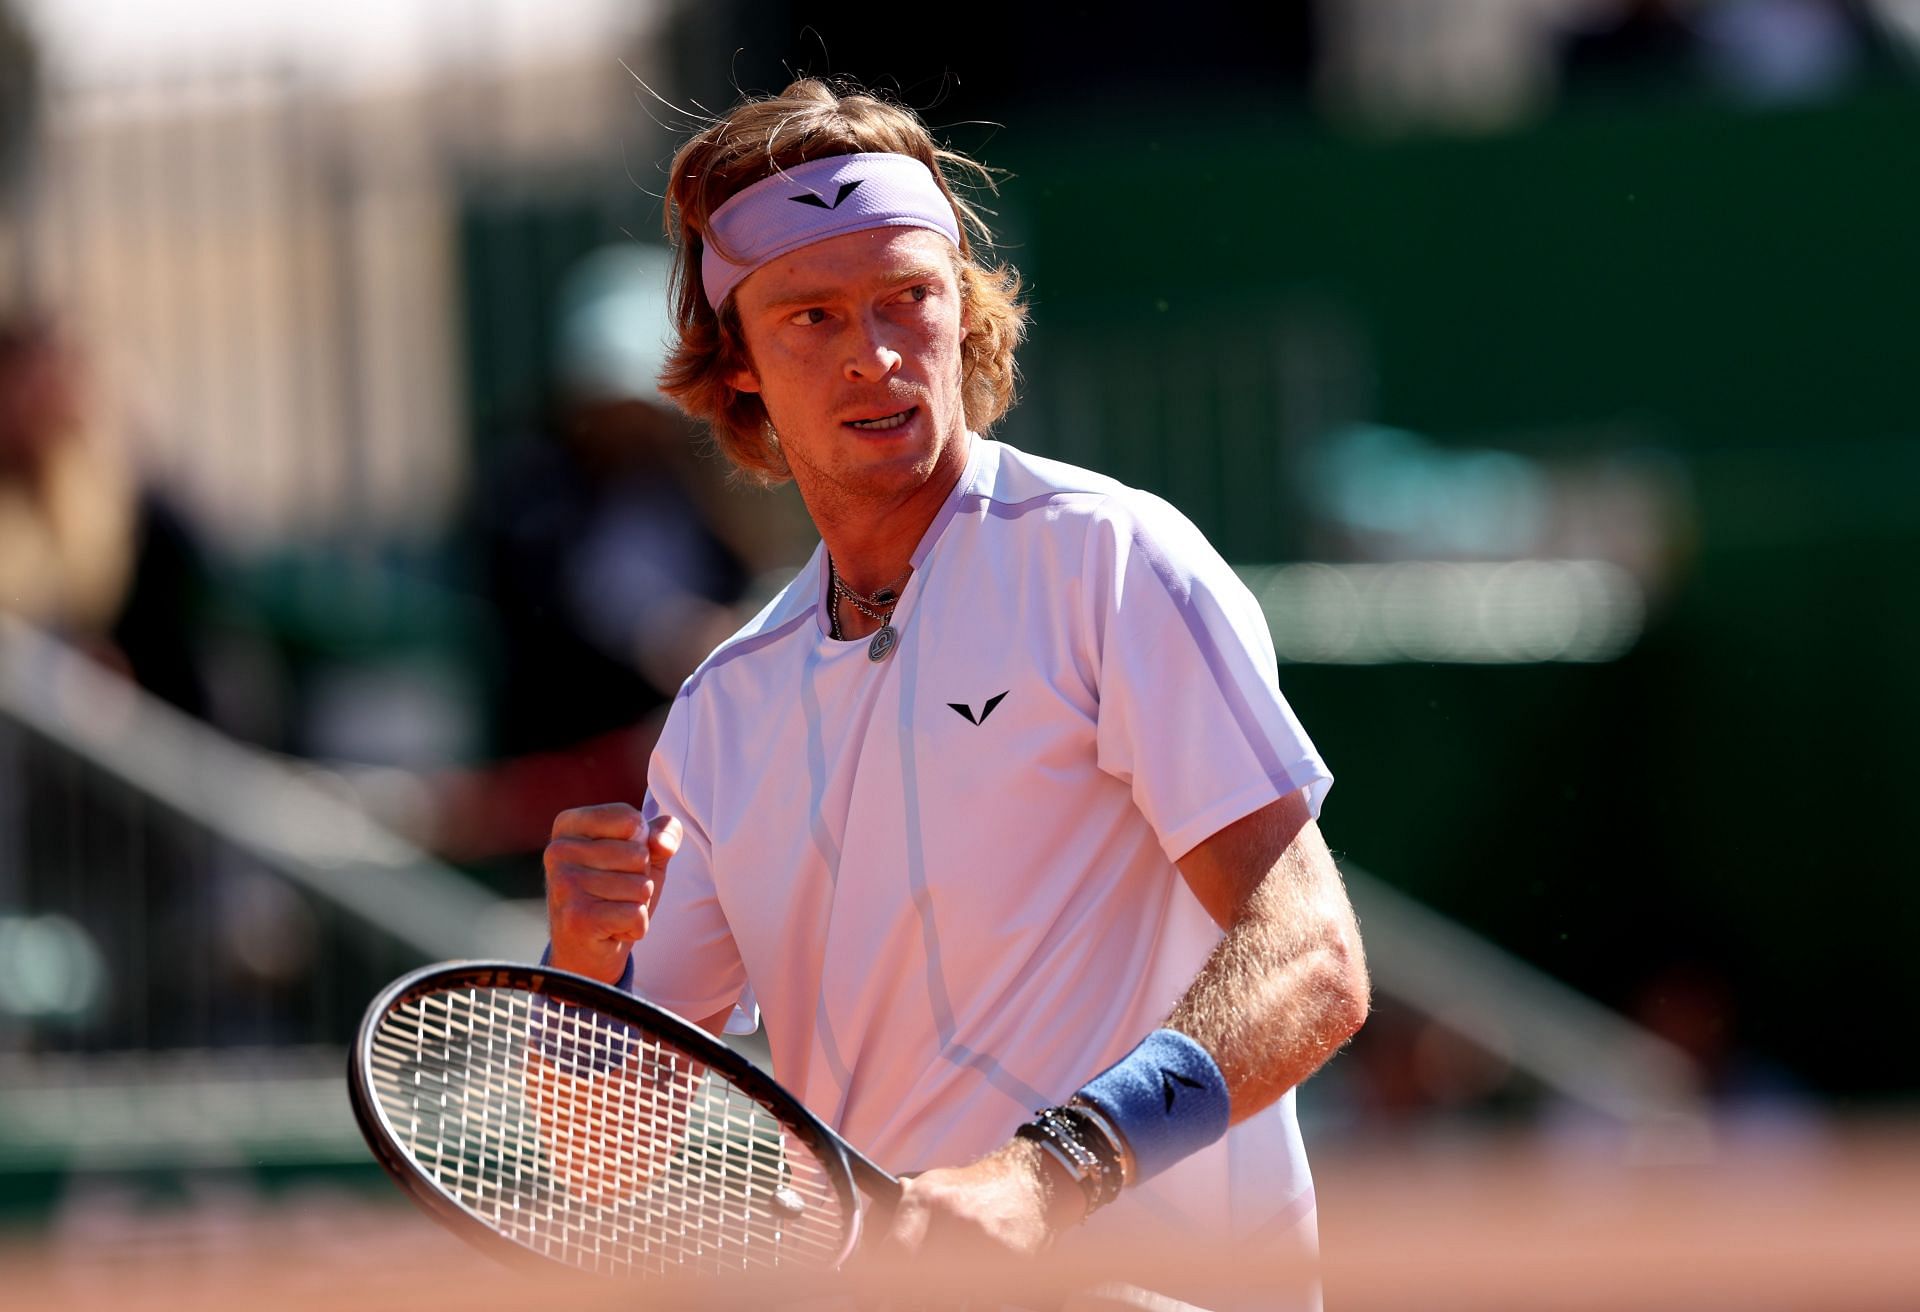 Monte-Carlo Masters 2023 Andrey Rublev vs Taylor Fritz preview, head-to-head, prediction, odds, and pick